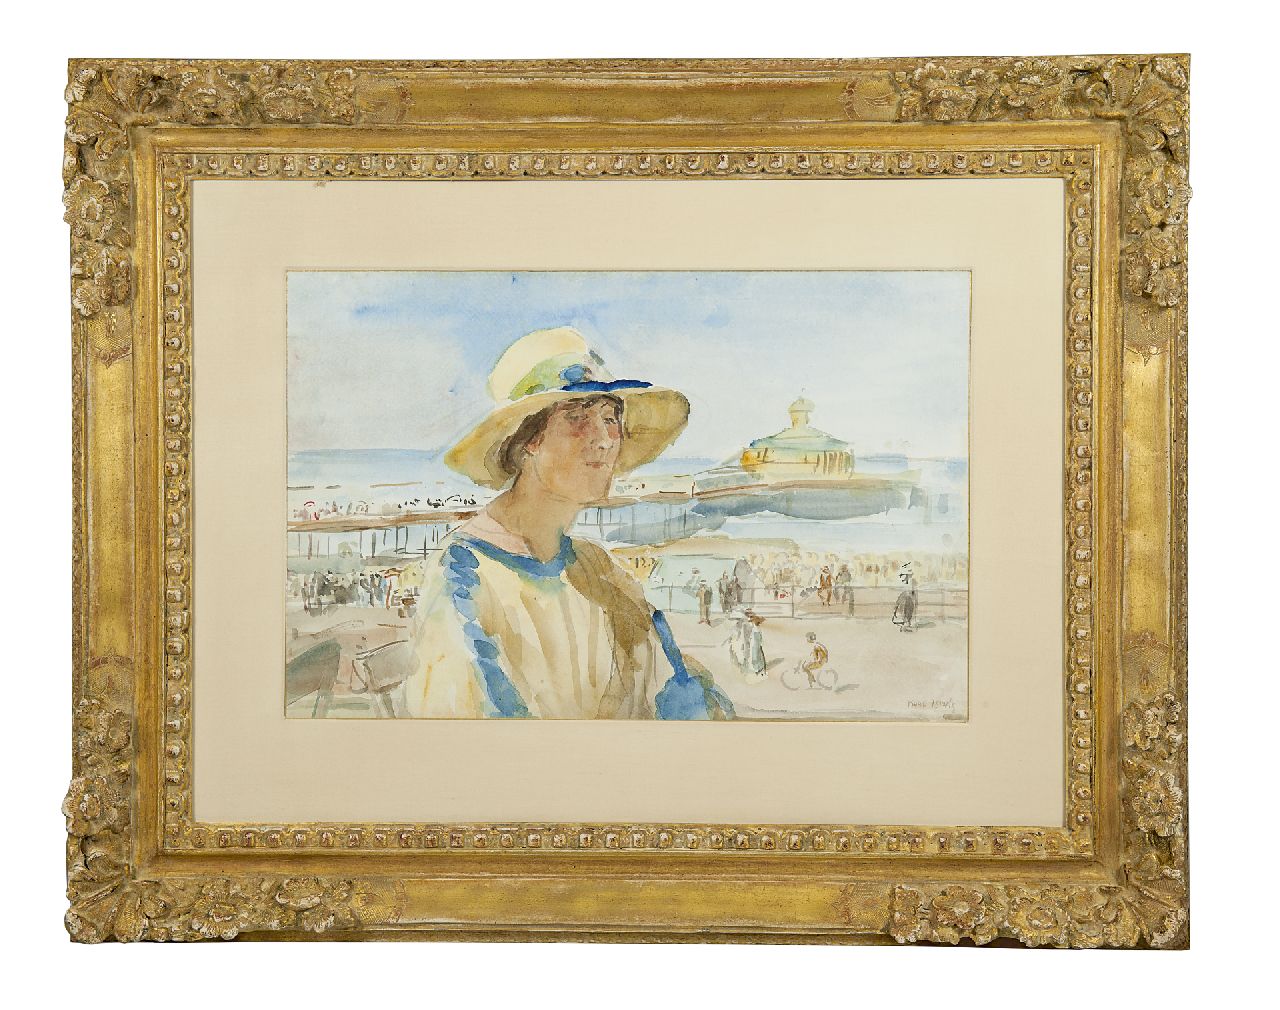 Israels I.L.  | 'Isaac' Lazarus Israels, Woman at the beach of Scheveningen, watercolour on paper 32.5 x 50.0 cm, signed l.r.